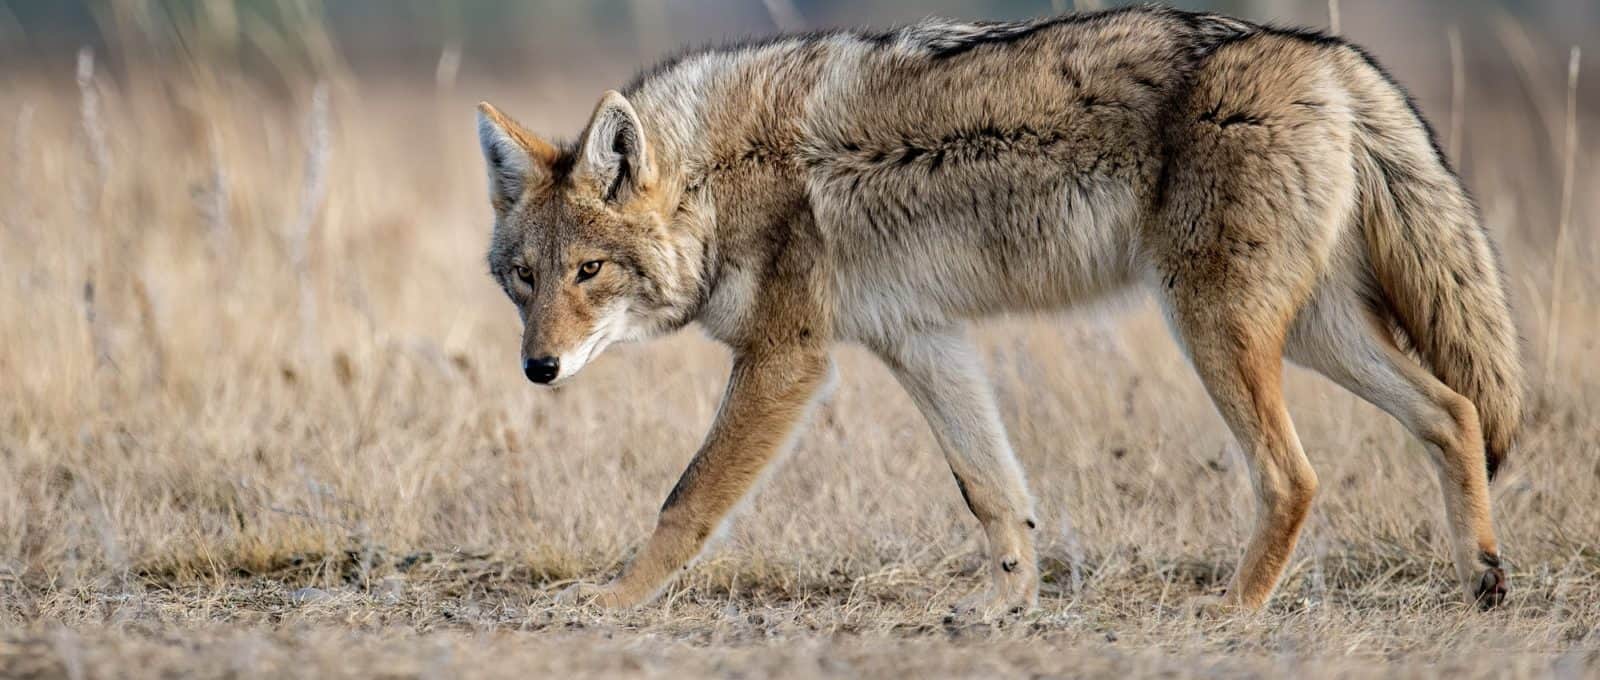 Coyote in Canada